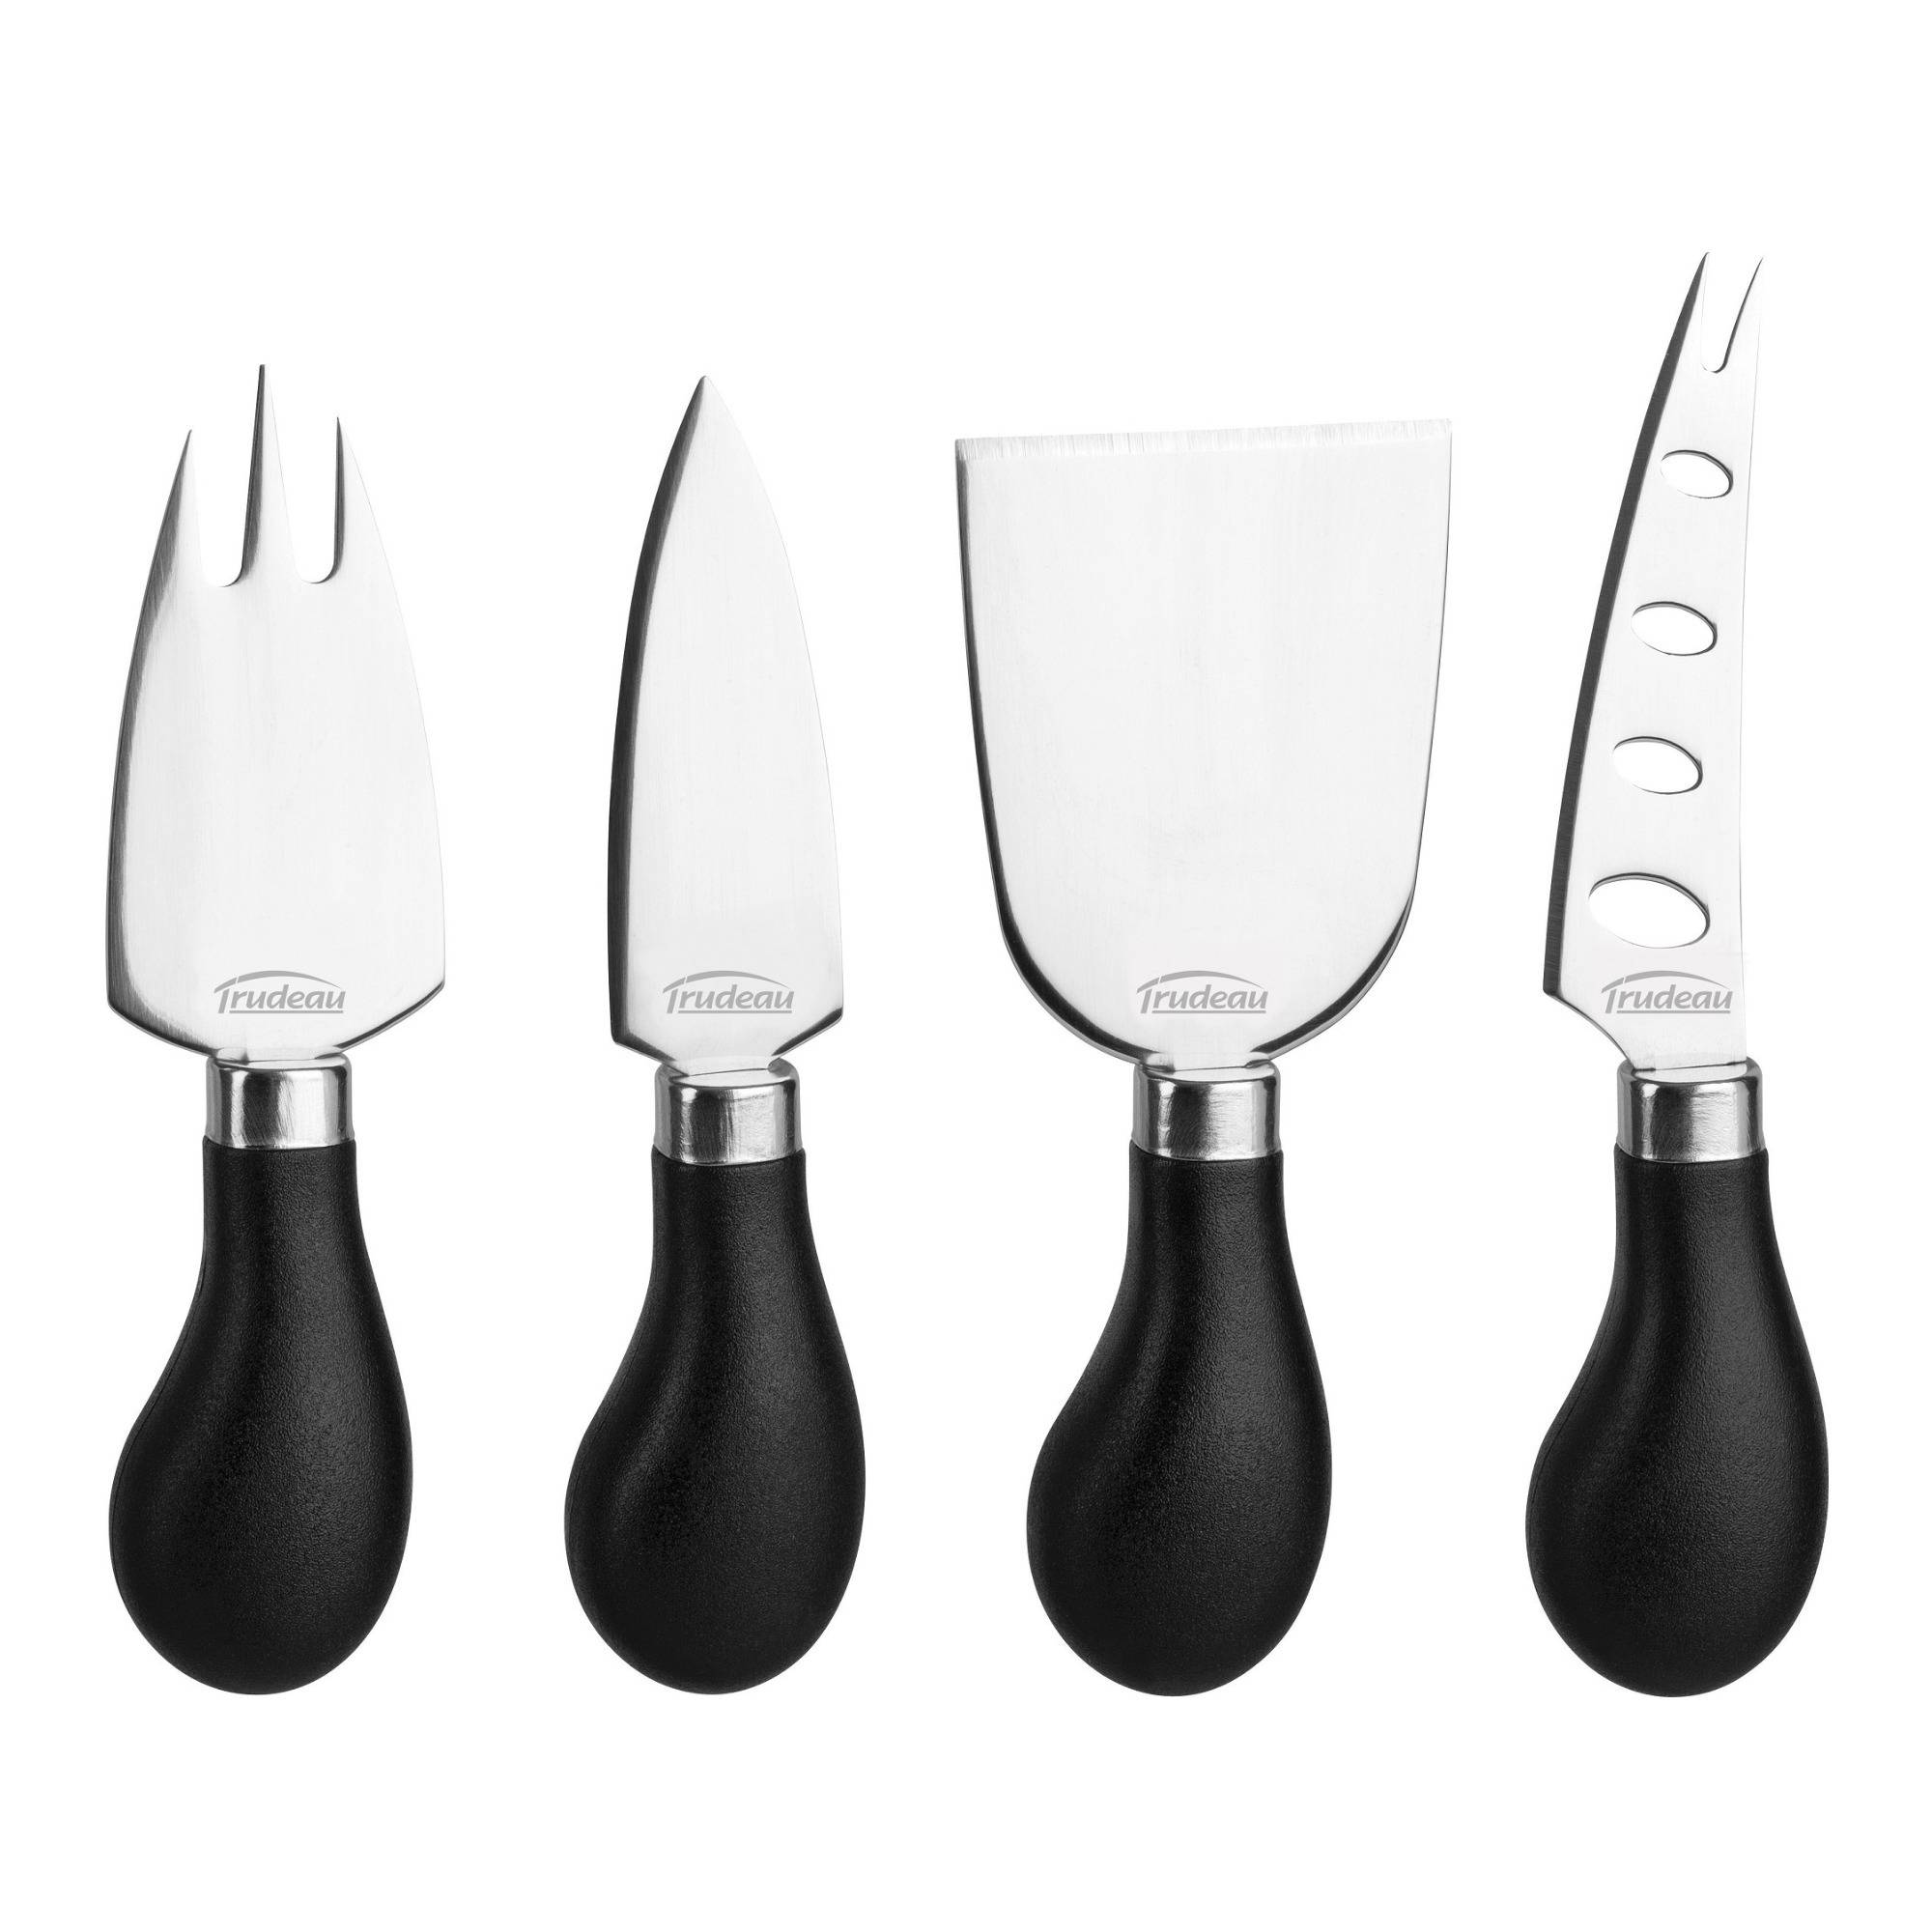 Trudeau Specialty Cheese Knives (Set of 4)